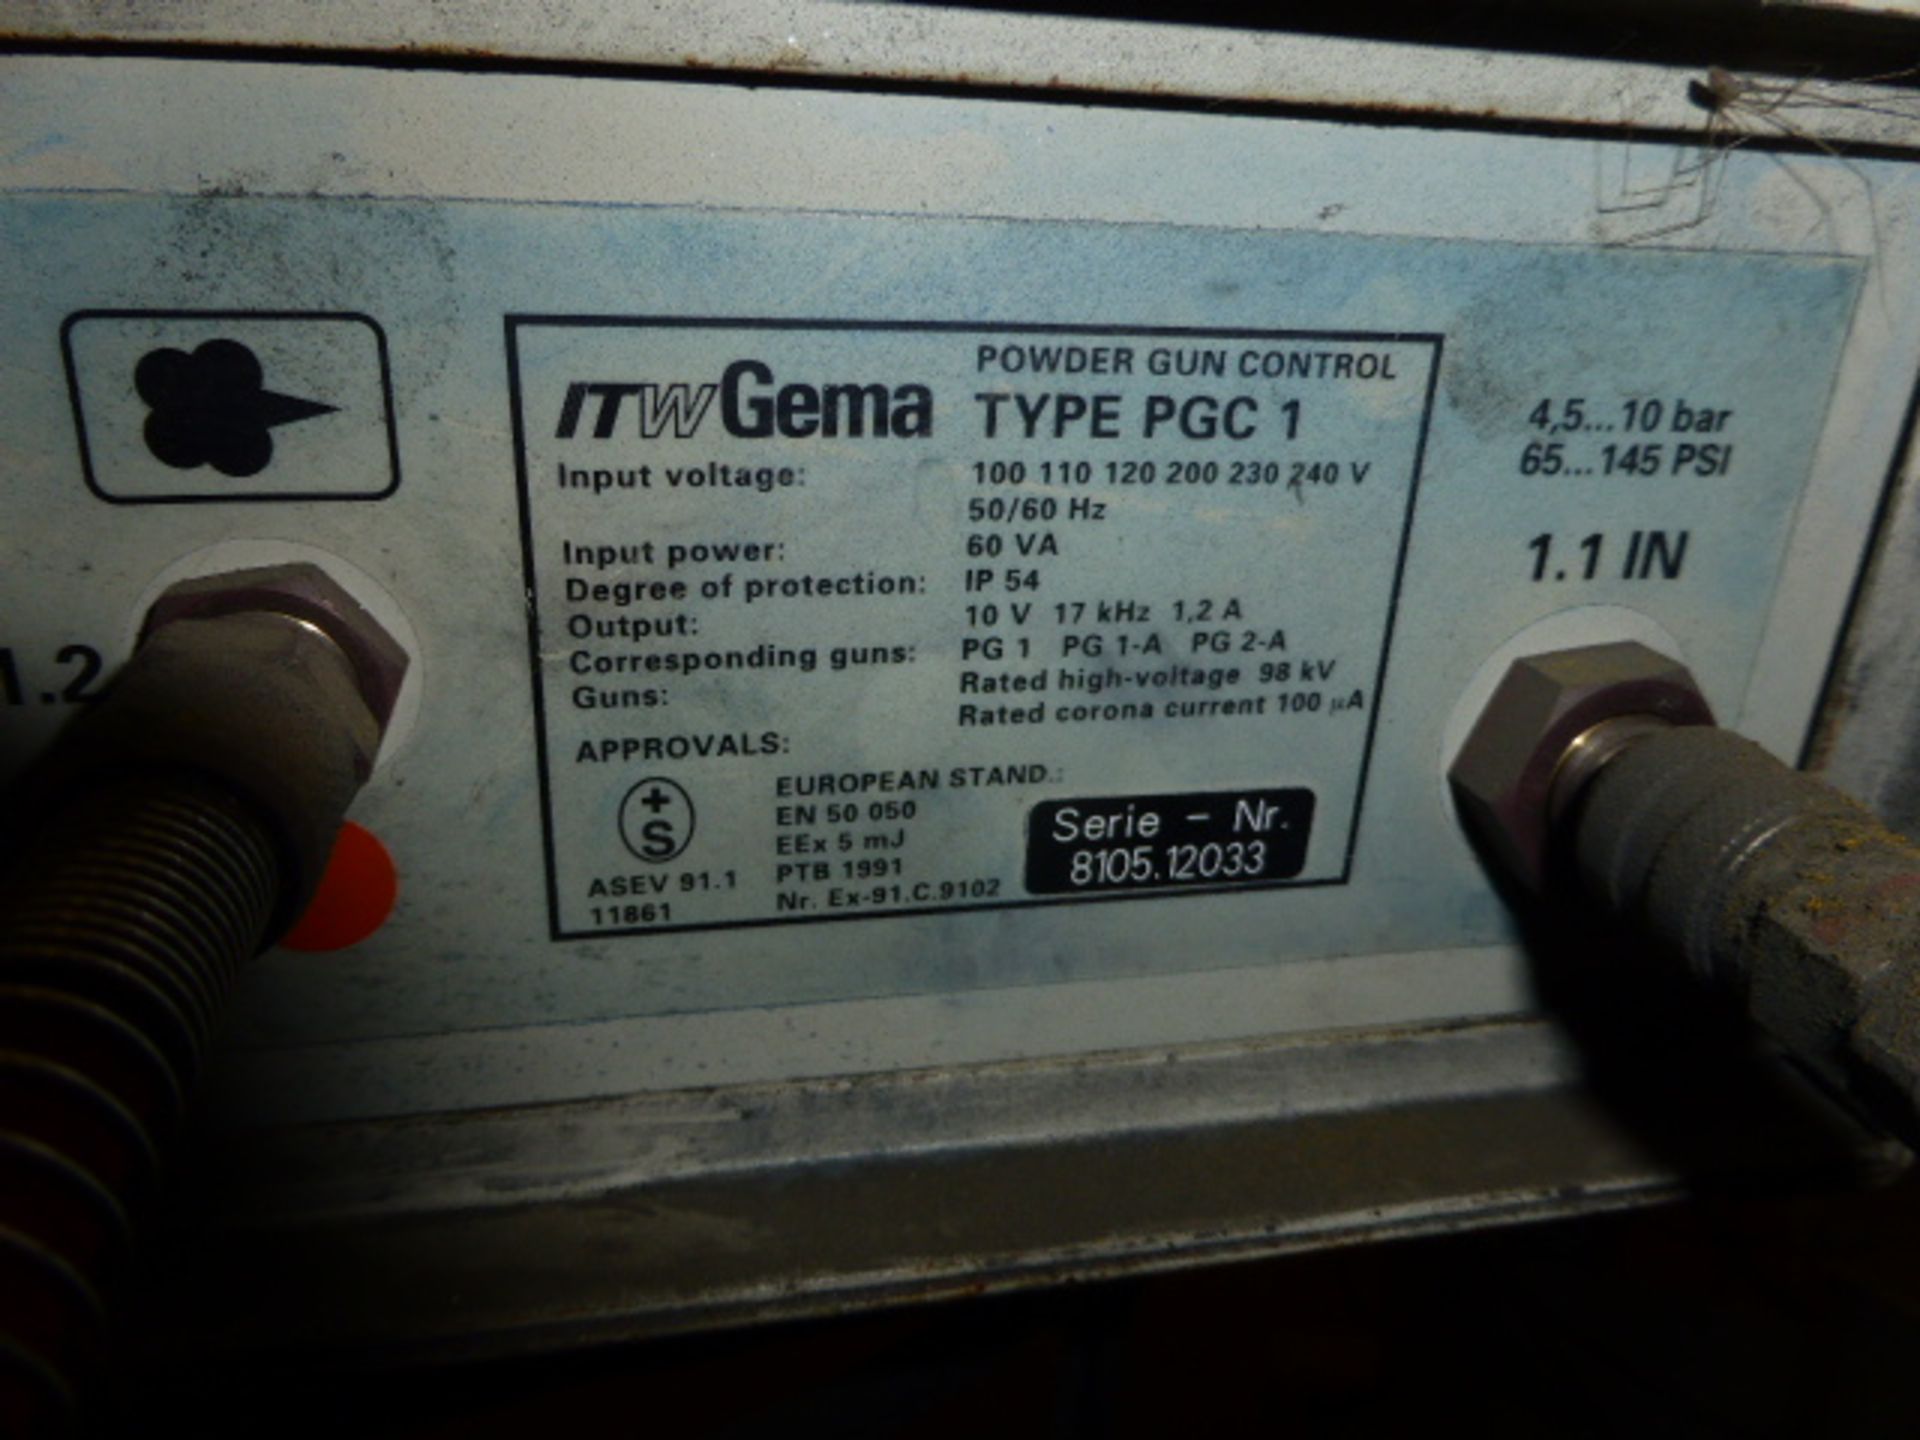 Gema Volstatic model PGC1 manual gun control unit with ITW Gema gun with associated hose and cabling - Image 5 of 6